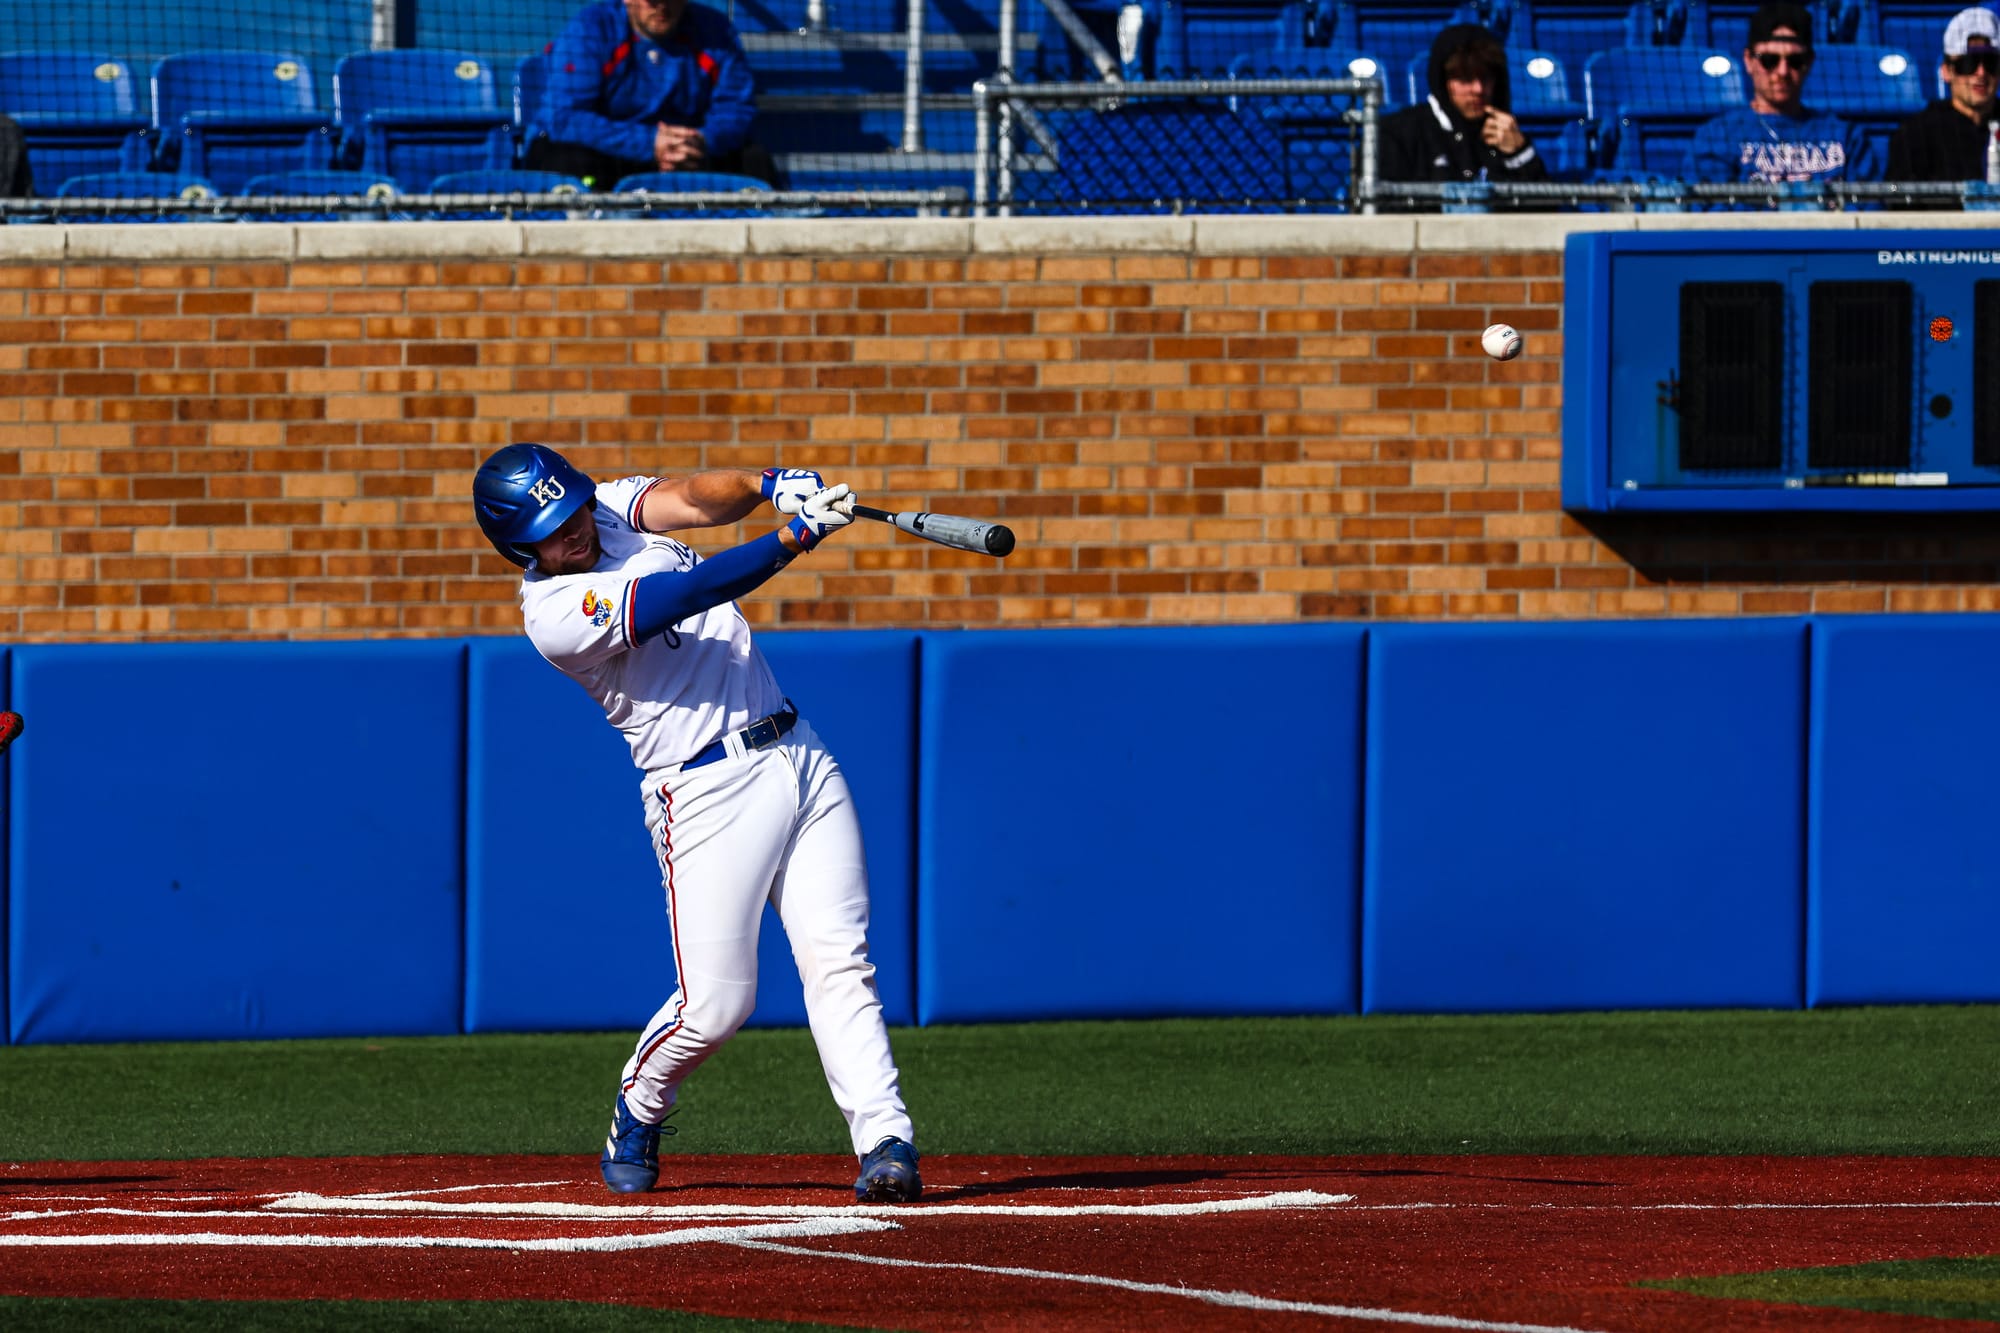 Patient approach at the plate lands Jake English in KU record book